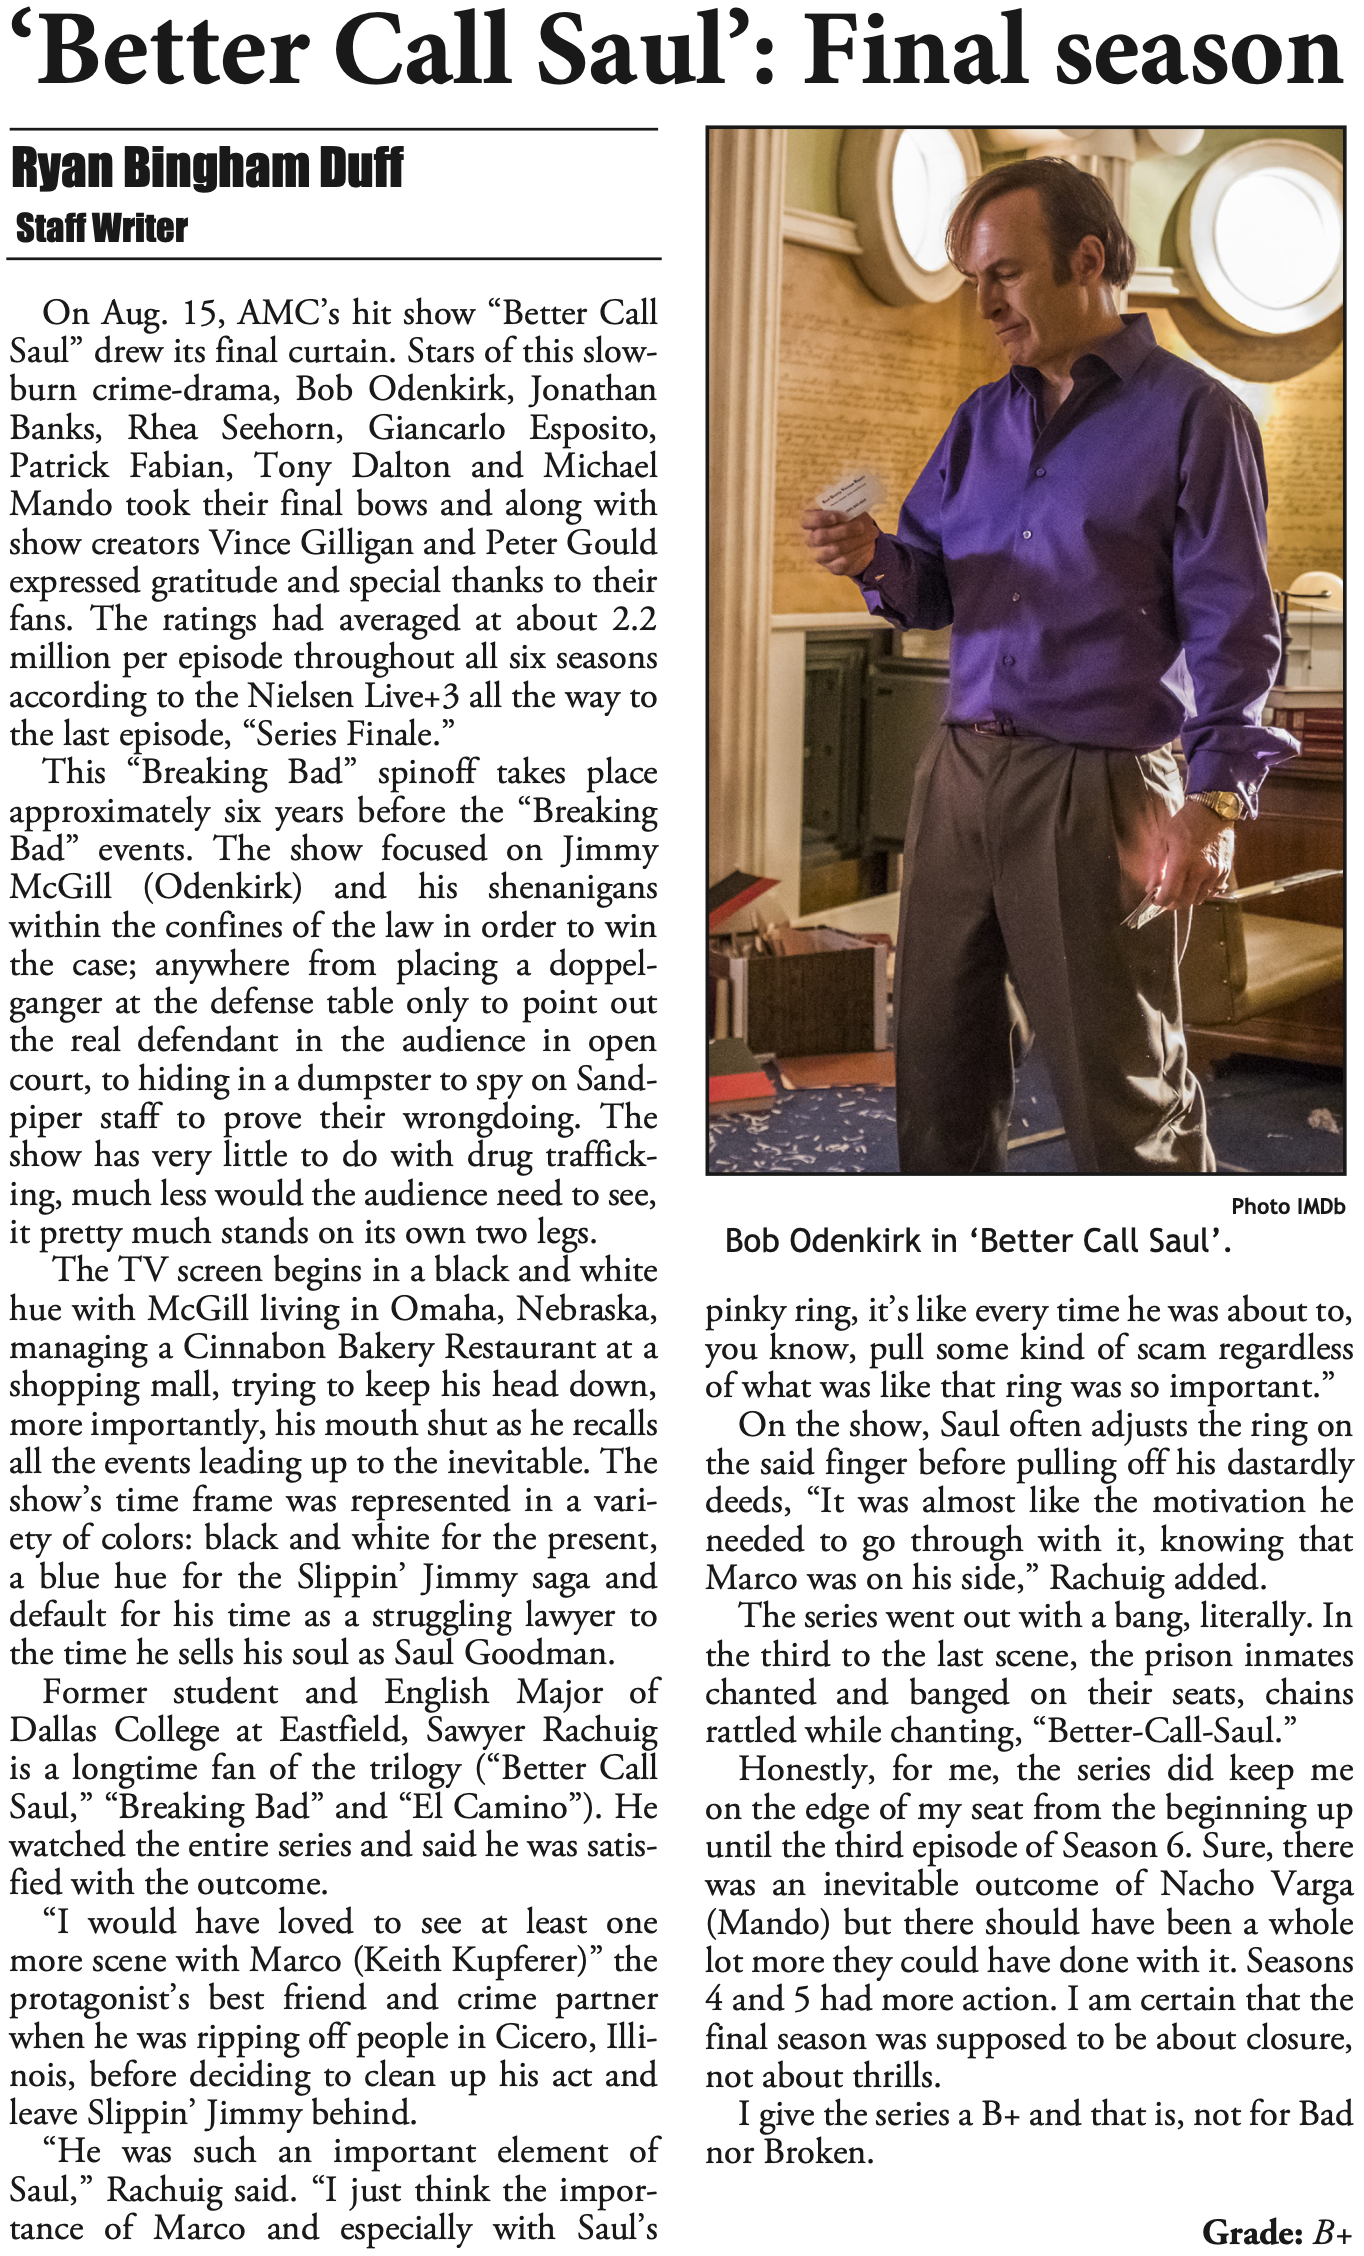 Digital newspaper clipping of Chronicle story by staff writer Ryan Bingham Duff about the final season of the TV series "Better Call Saul."